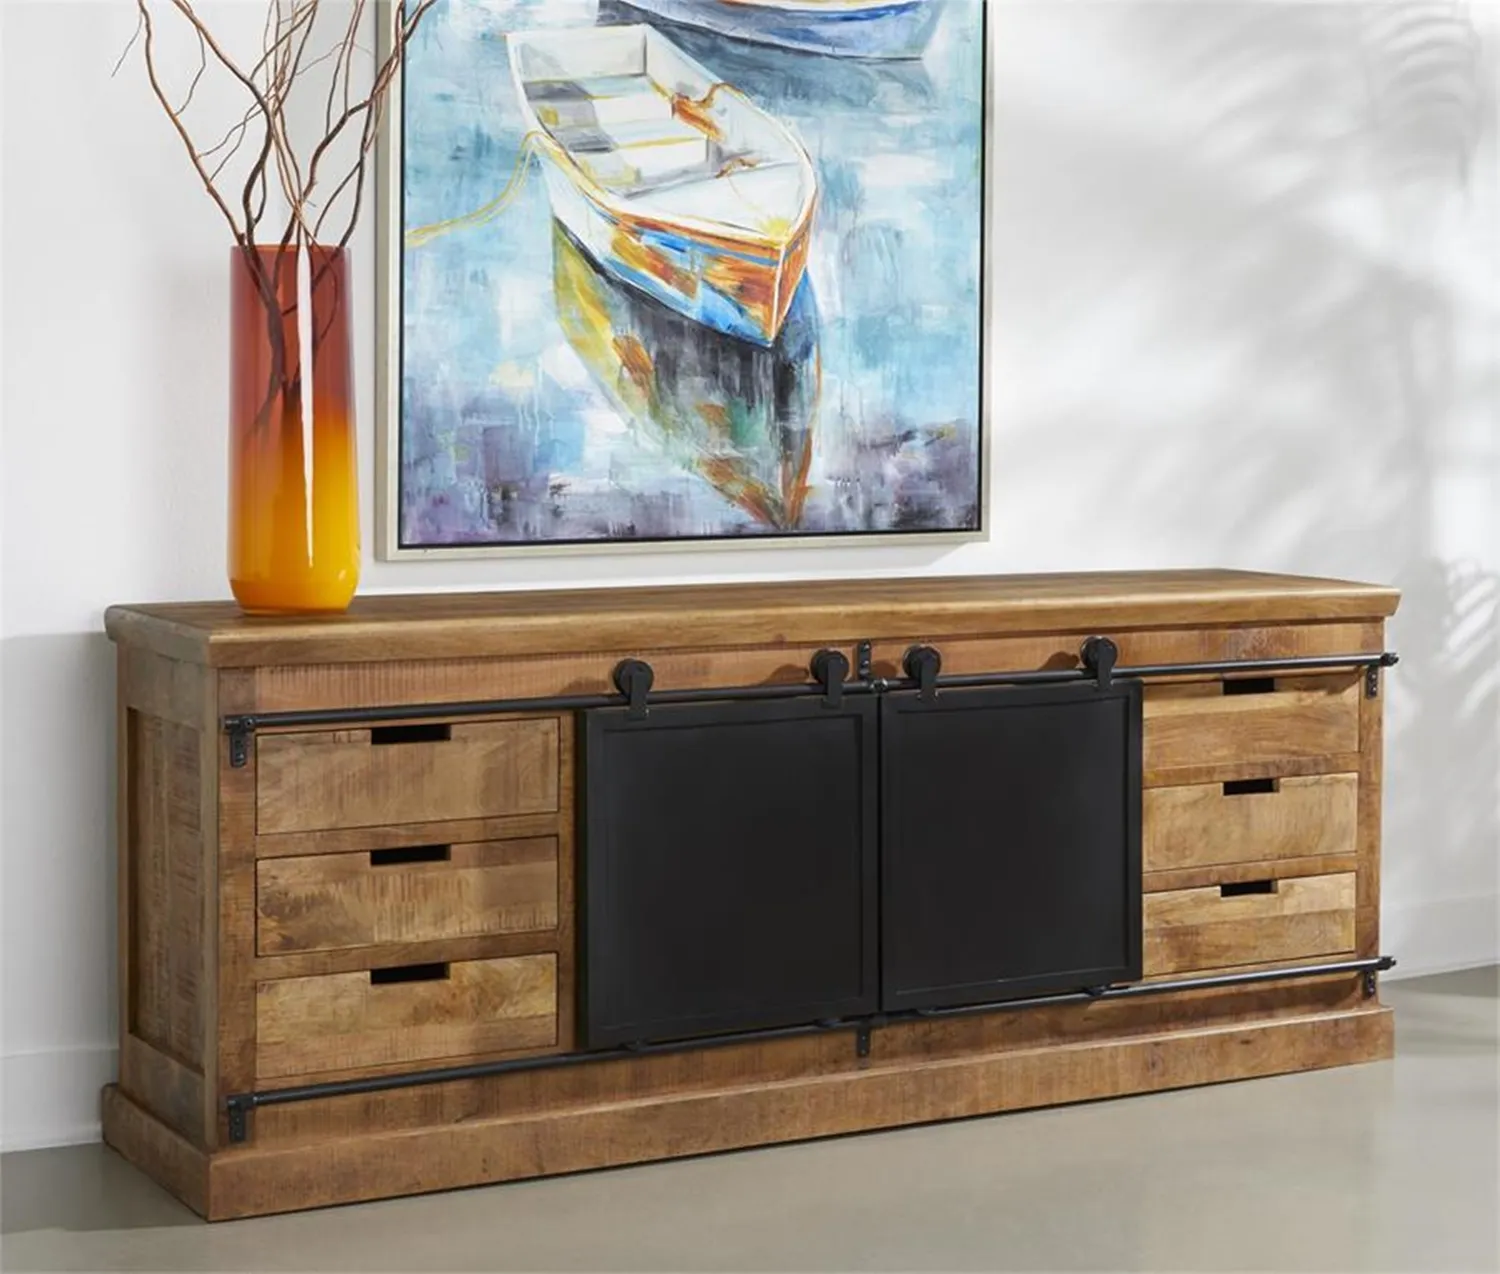 WALLEN EXOTIC SHEESHAM WOOD 2 SLIDING BARN DOORS 6 DRAWER SIDEBOARD CREDENZA WITH A CHATTERMARK FINISH